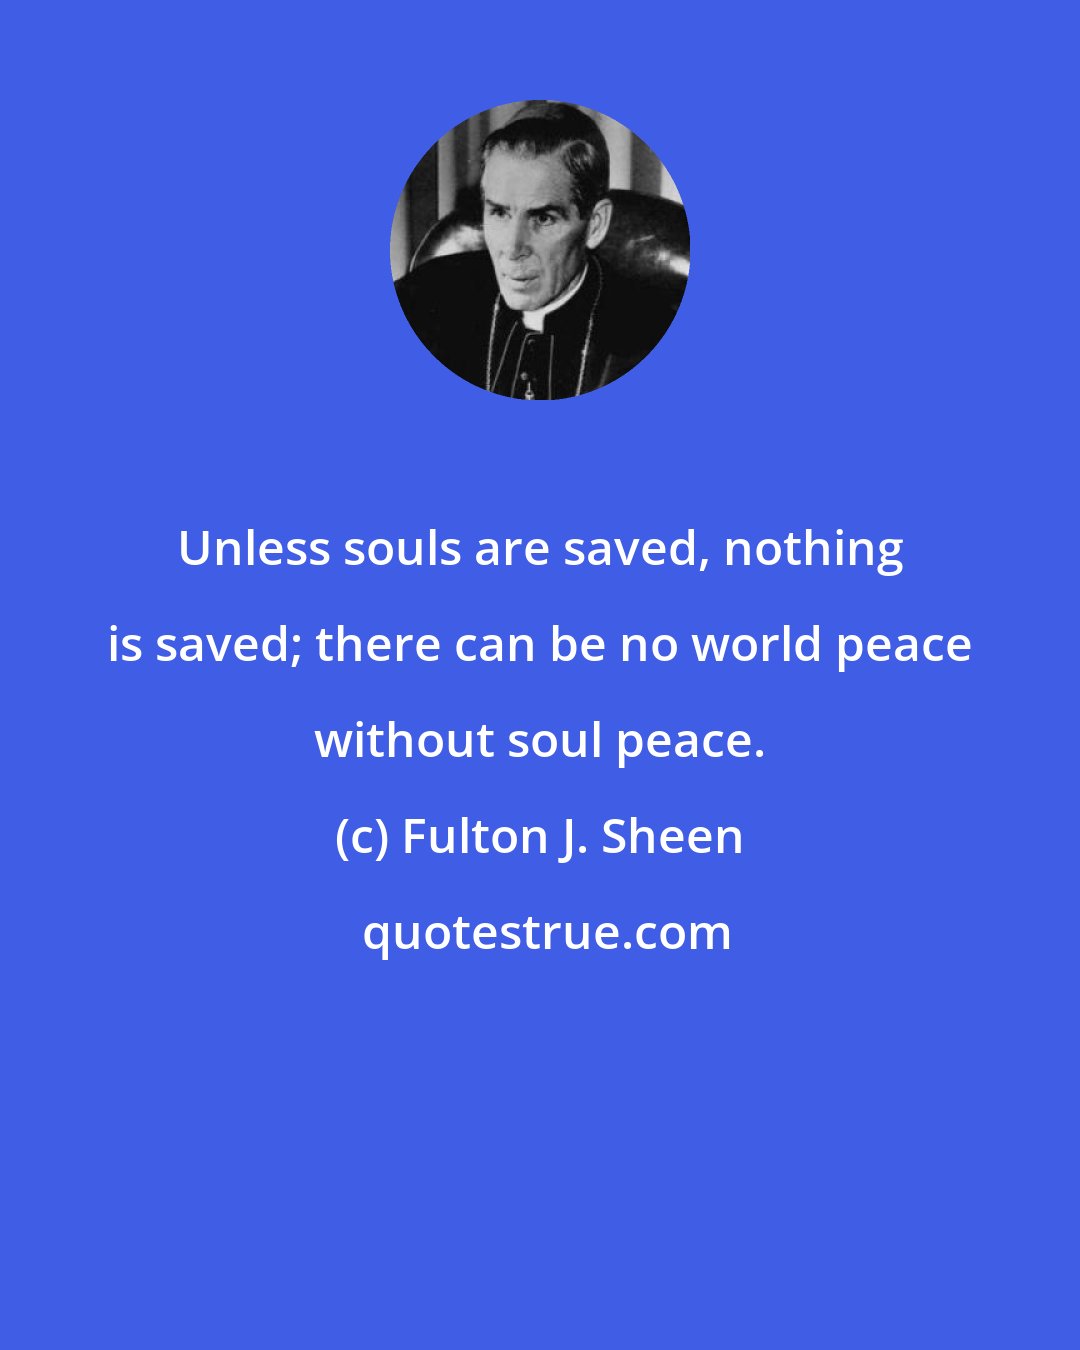 Fulton J. Sheen: Unless souls are saved, nothing is saved; there can be no world peace without soul peace.